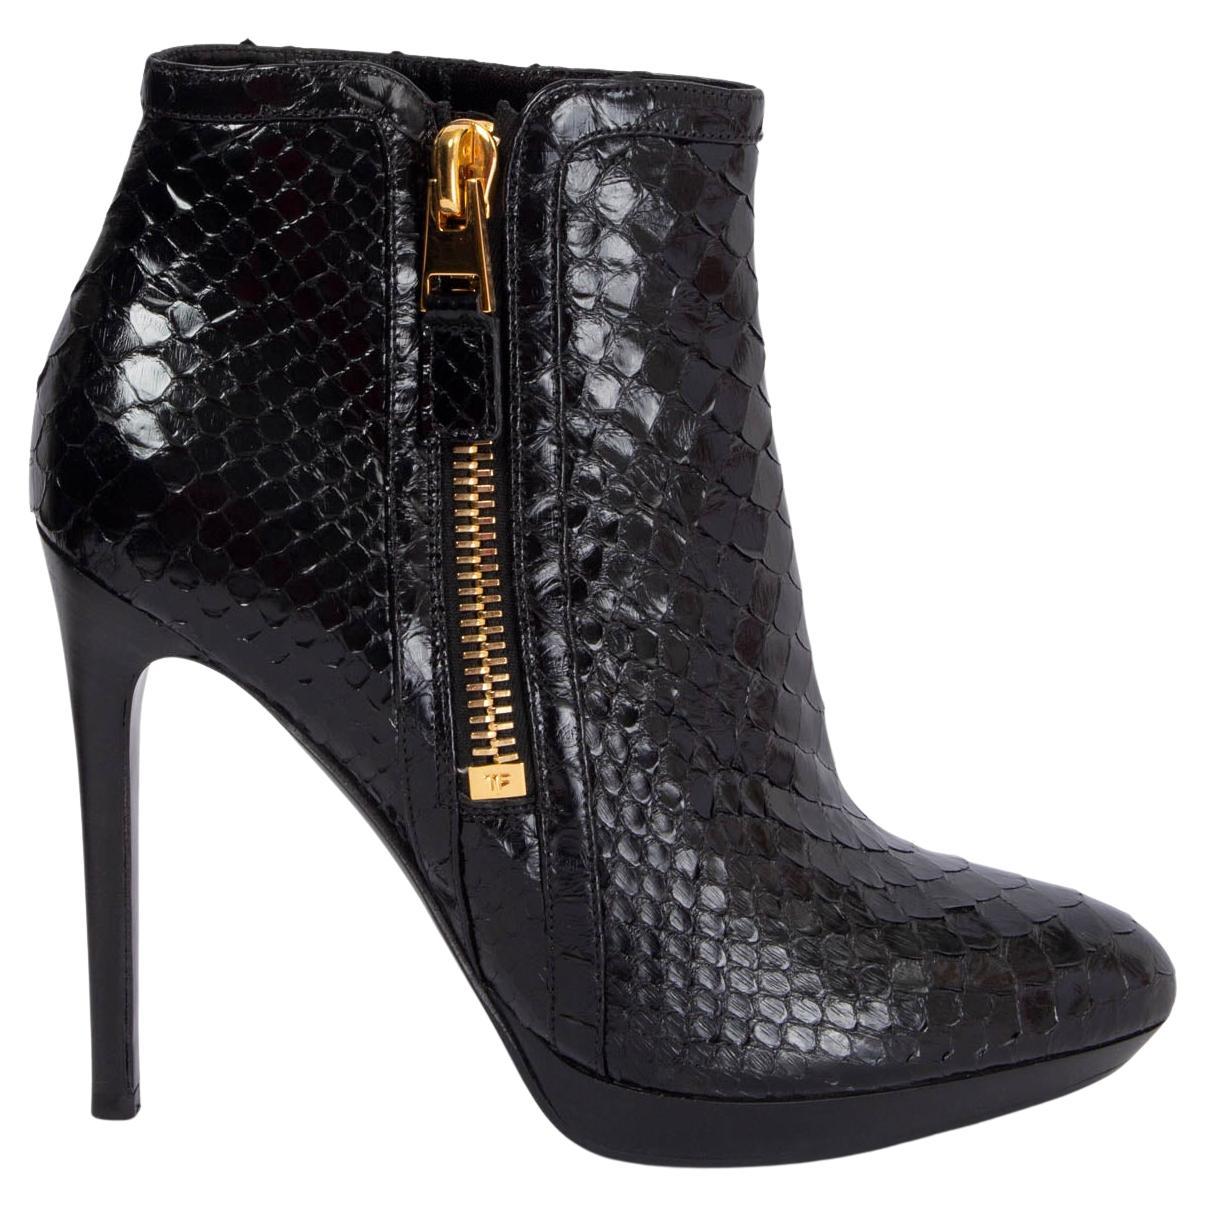 Tom Ford Black Python Ankle Boots Shoes 40